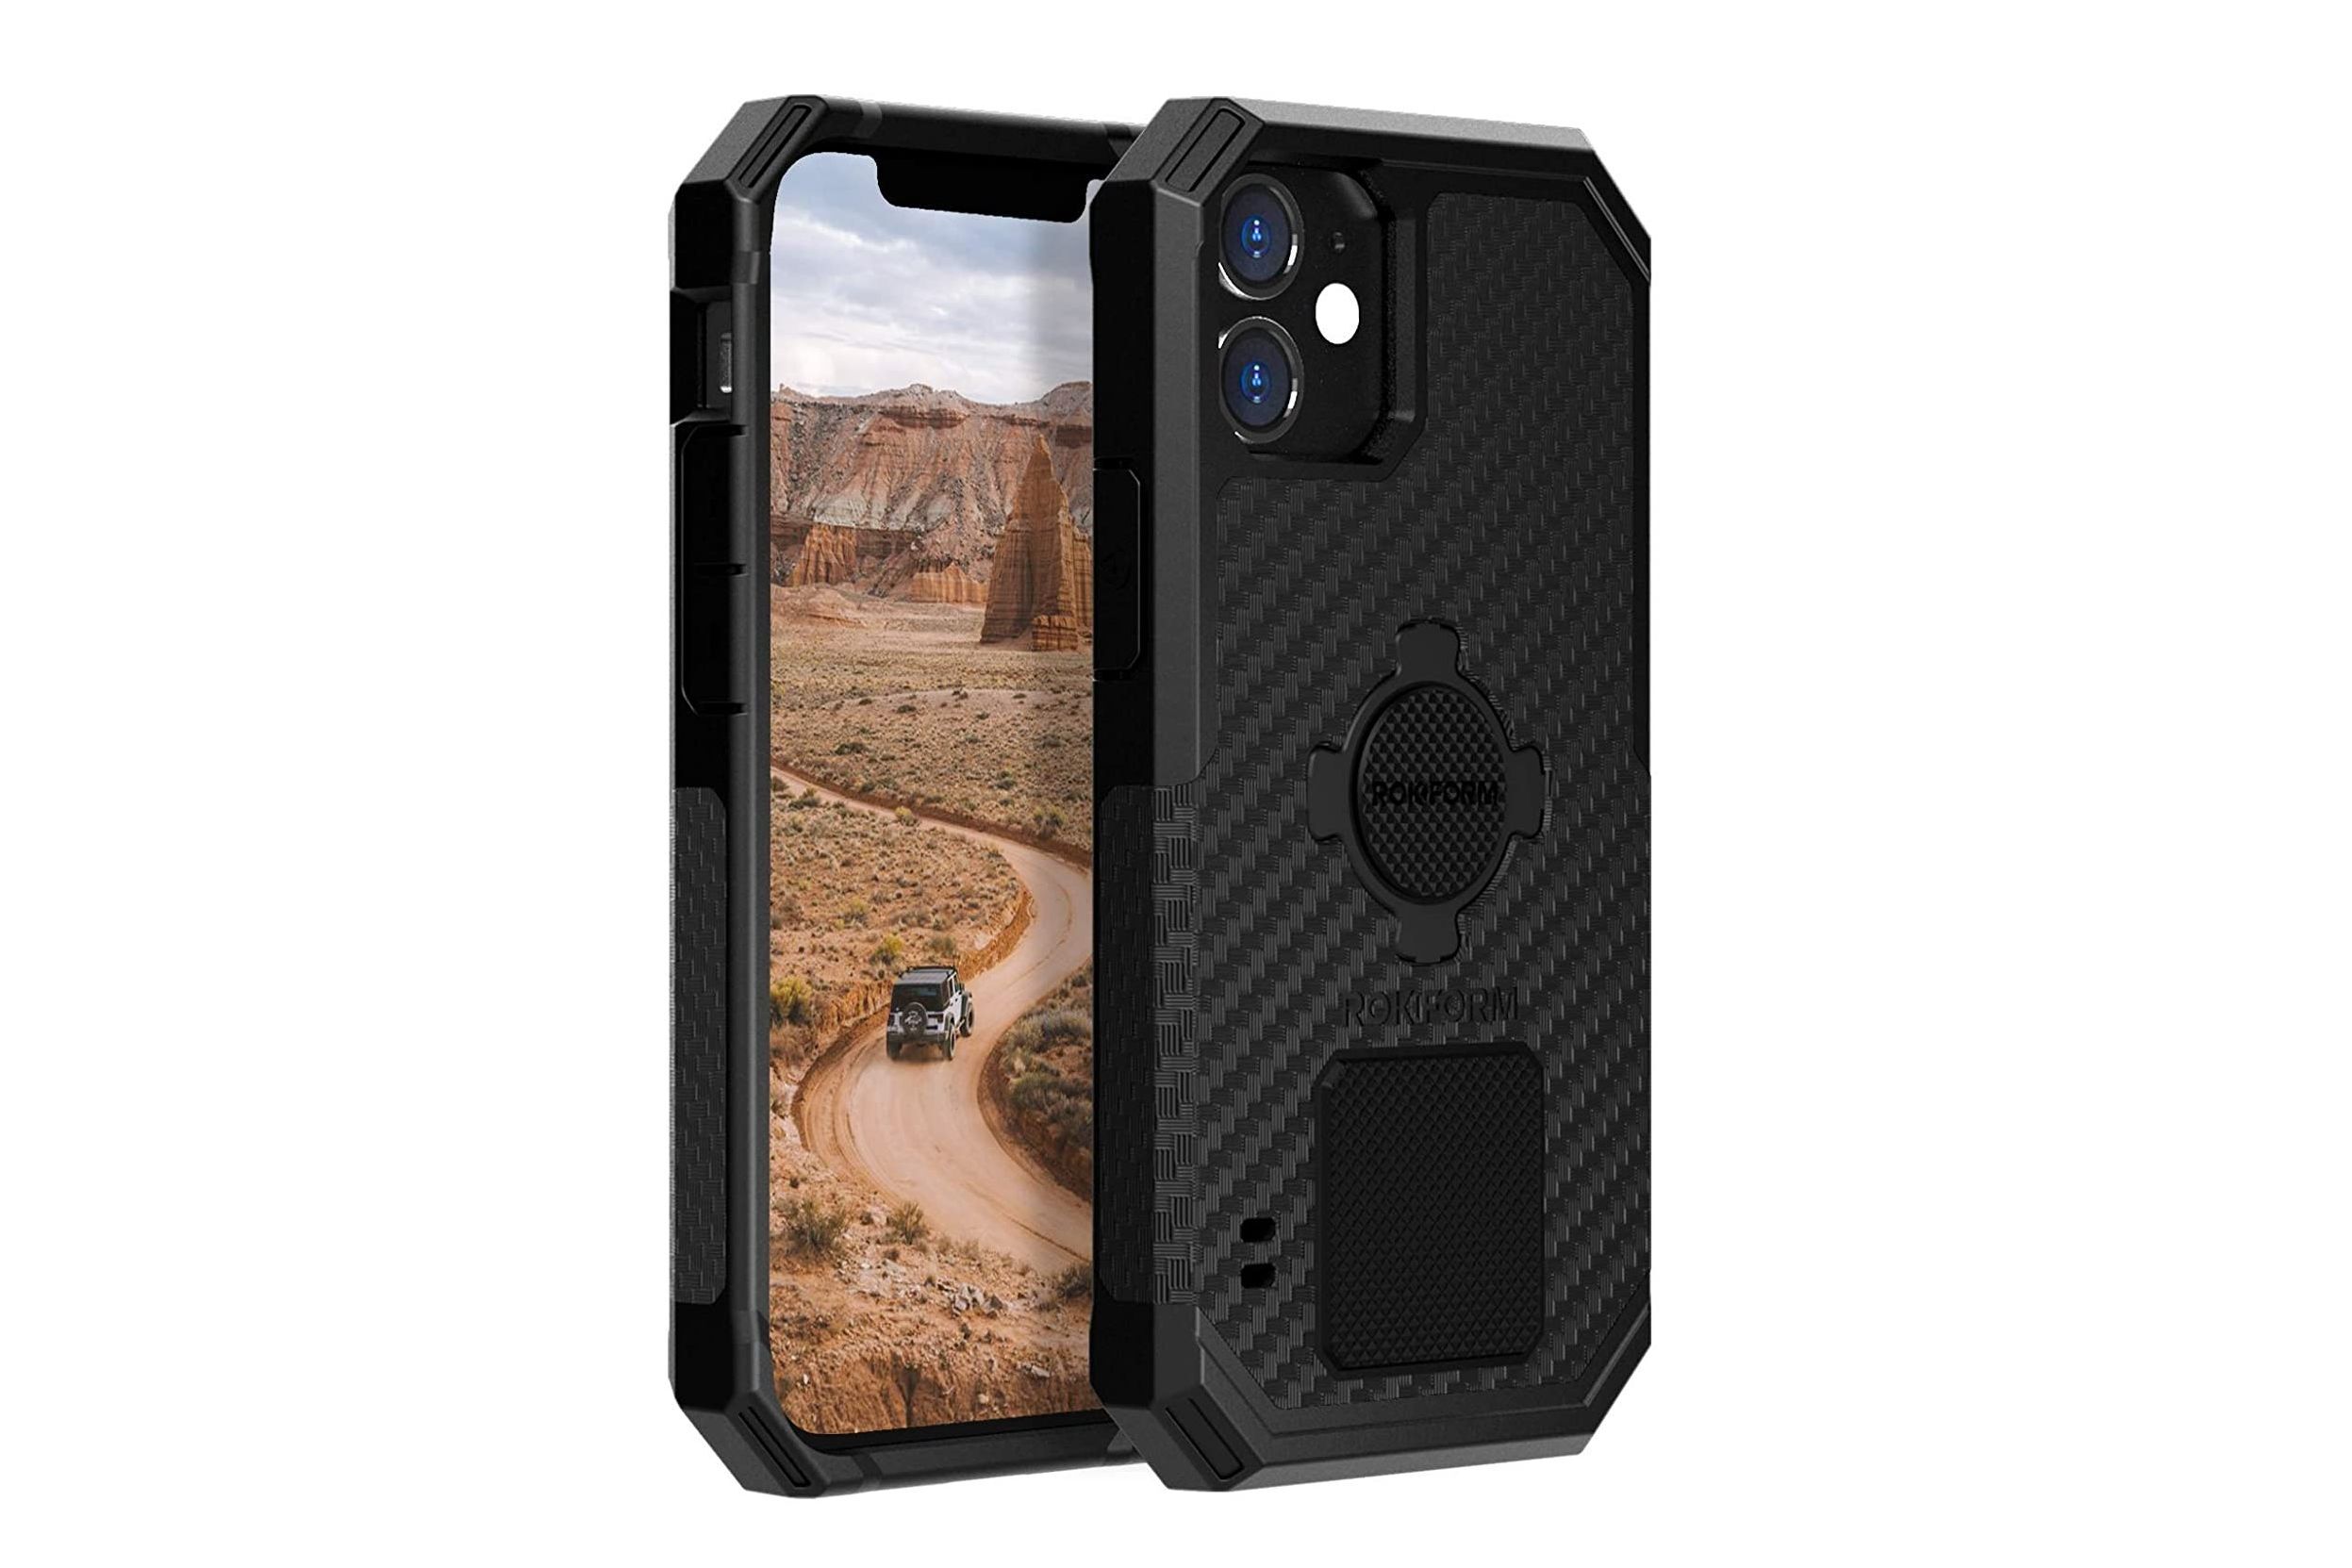 Rokform - iPhone 12 Mini Magnetic Protective Case - The best iPhone 12 mini cases you can get - updated July 2022